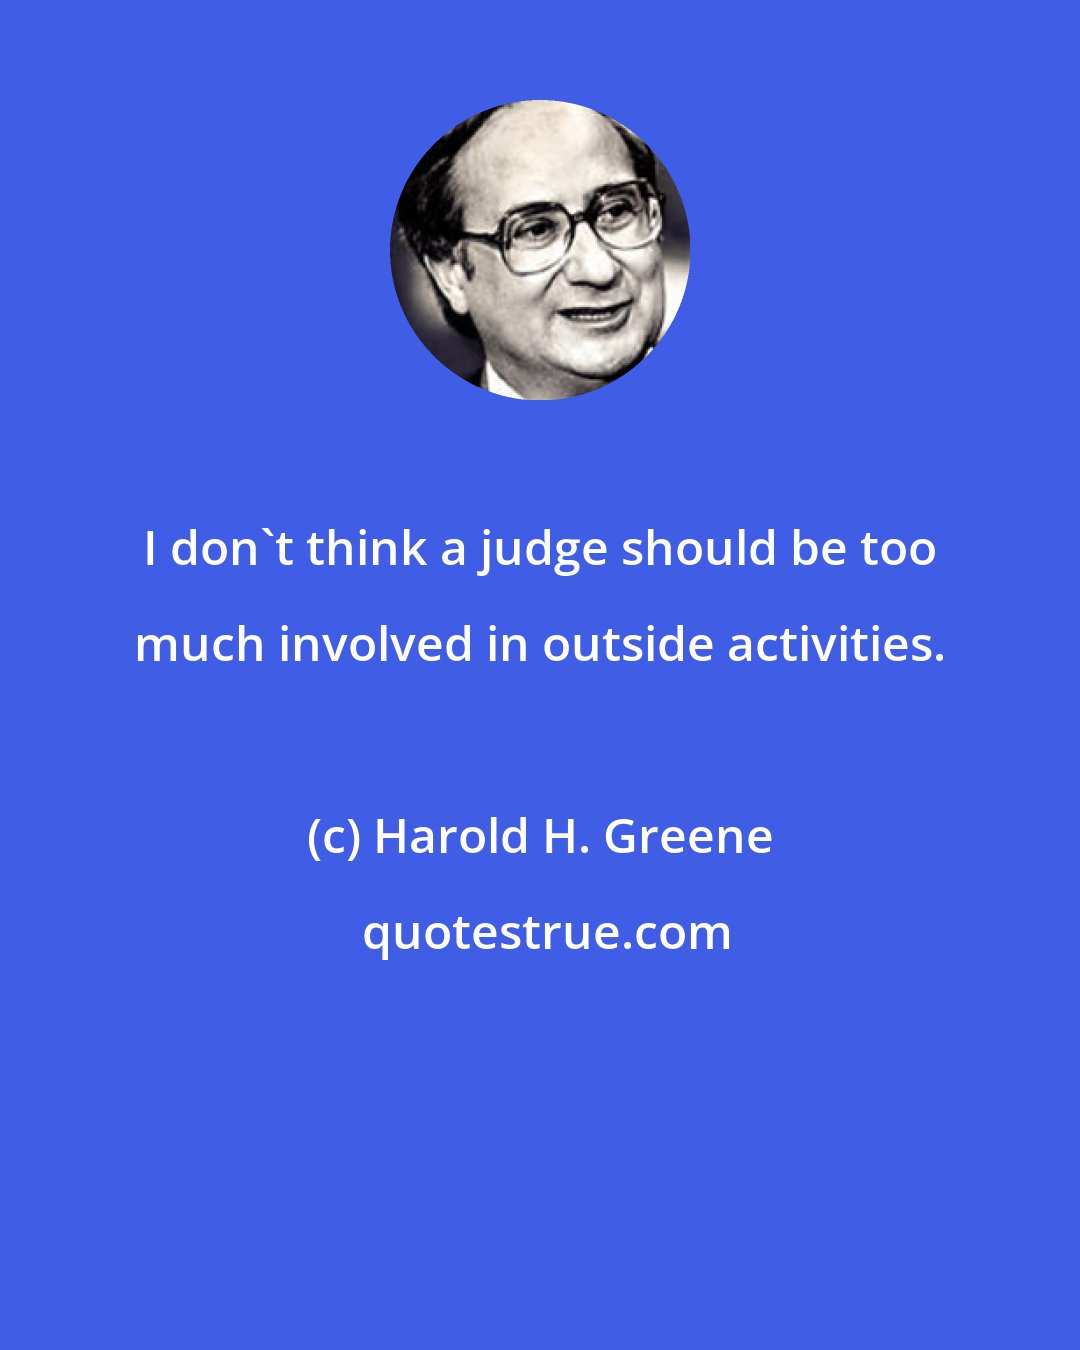 Harold H. Greene: I don't think a judge should be too much involved in outside activities.